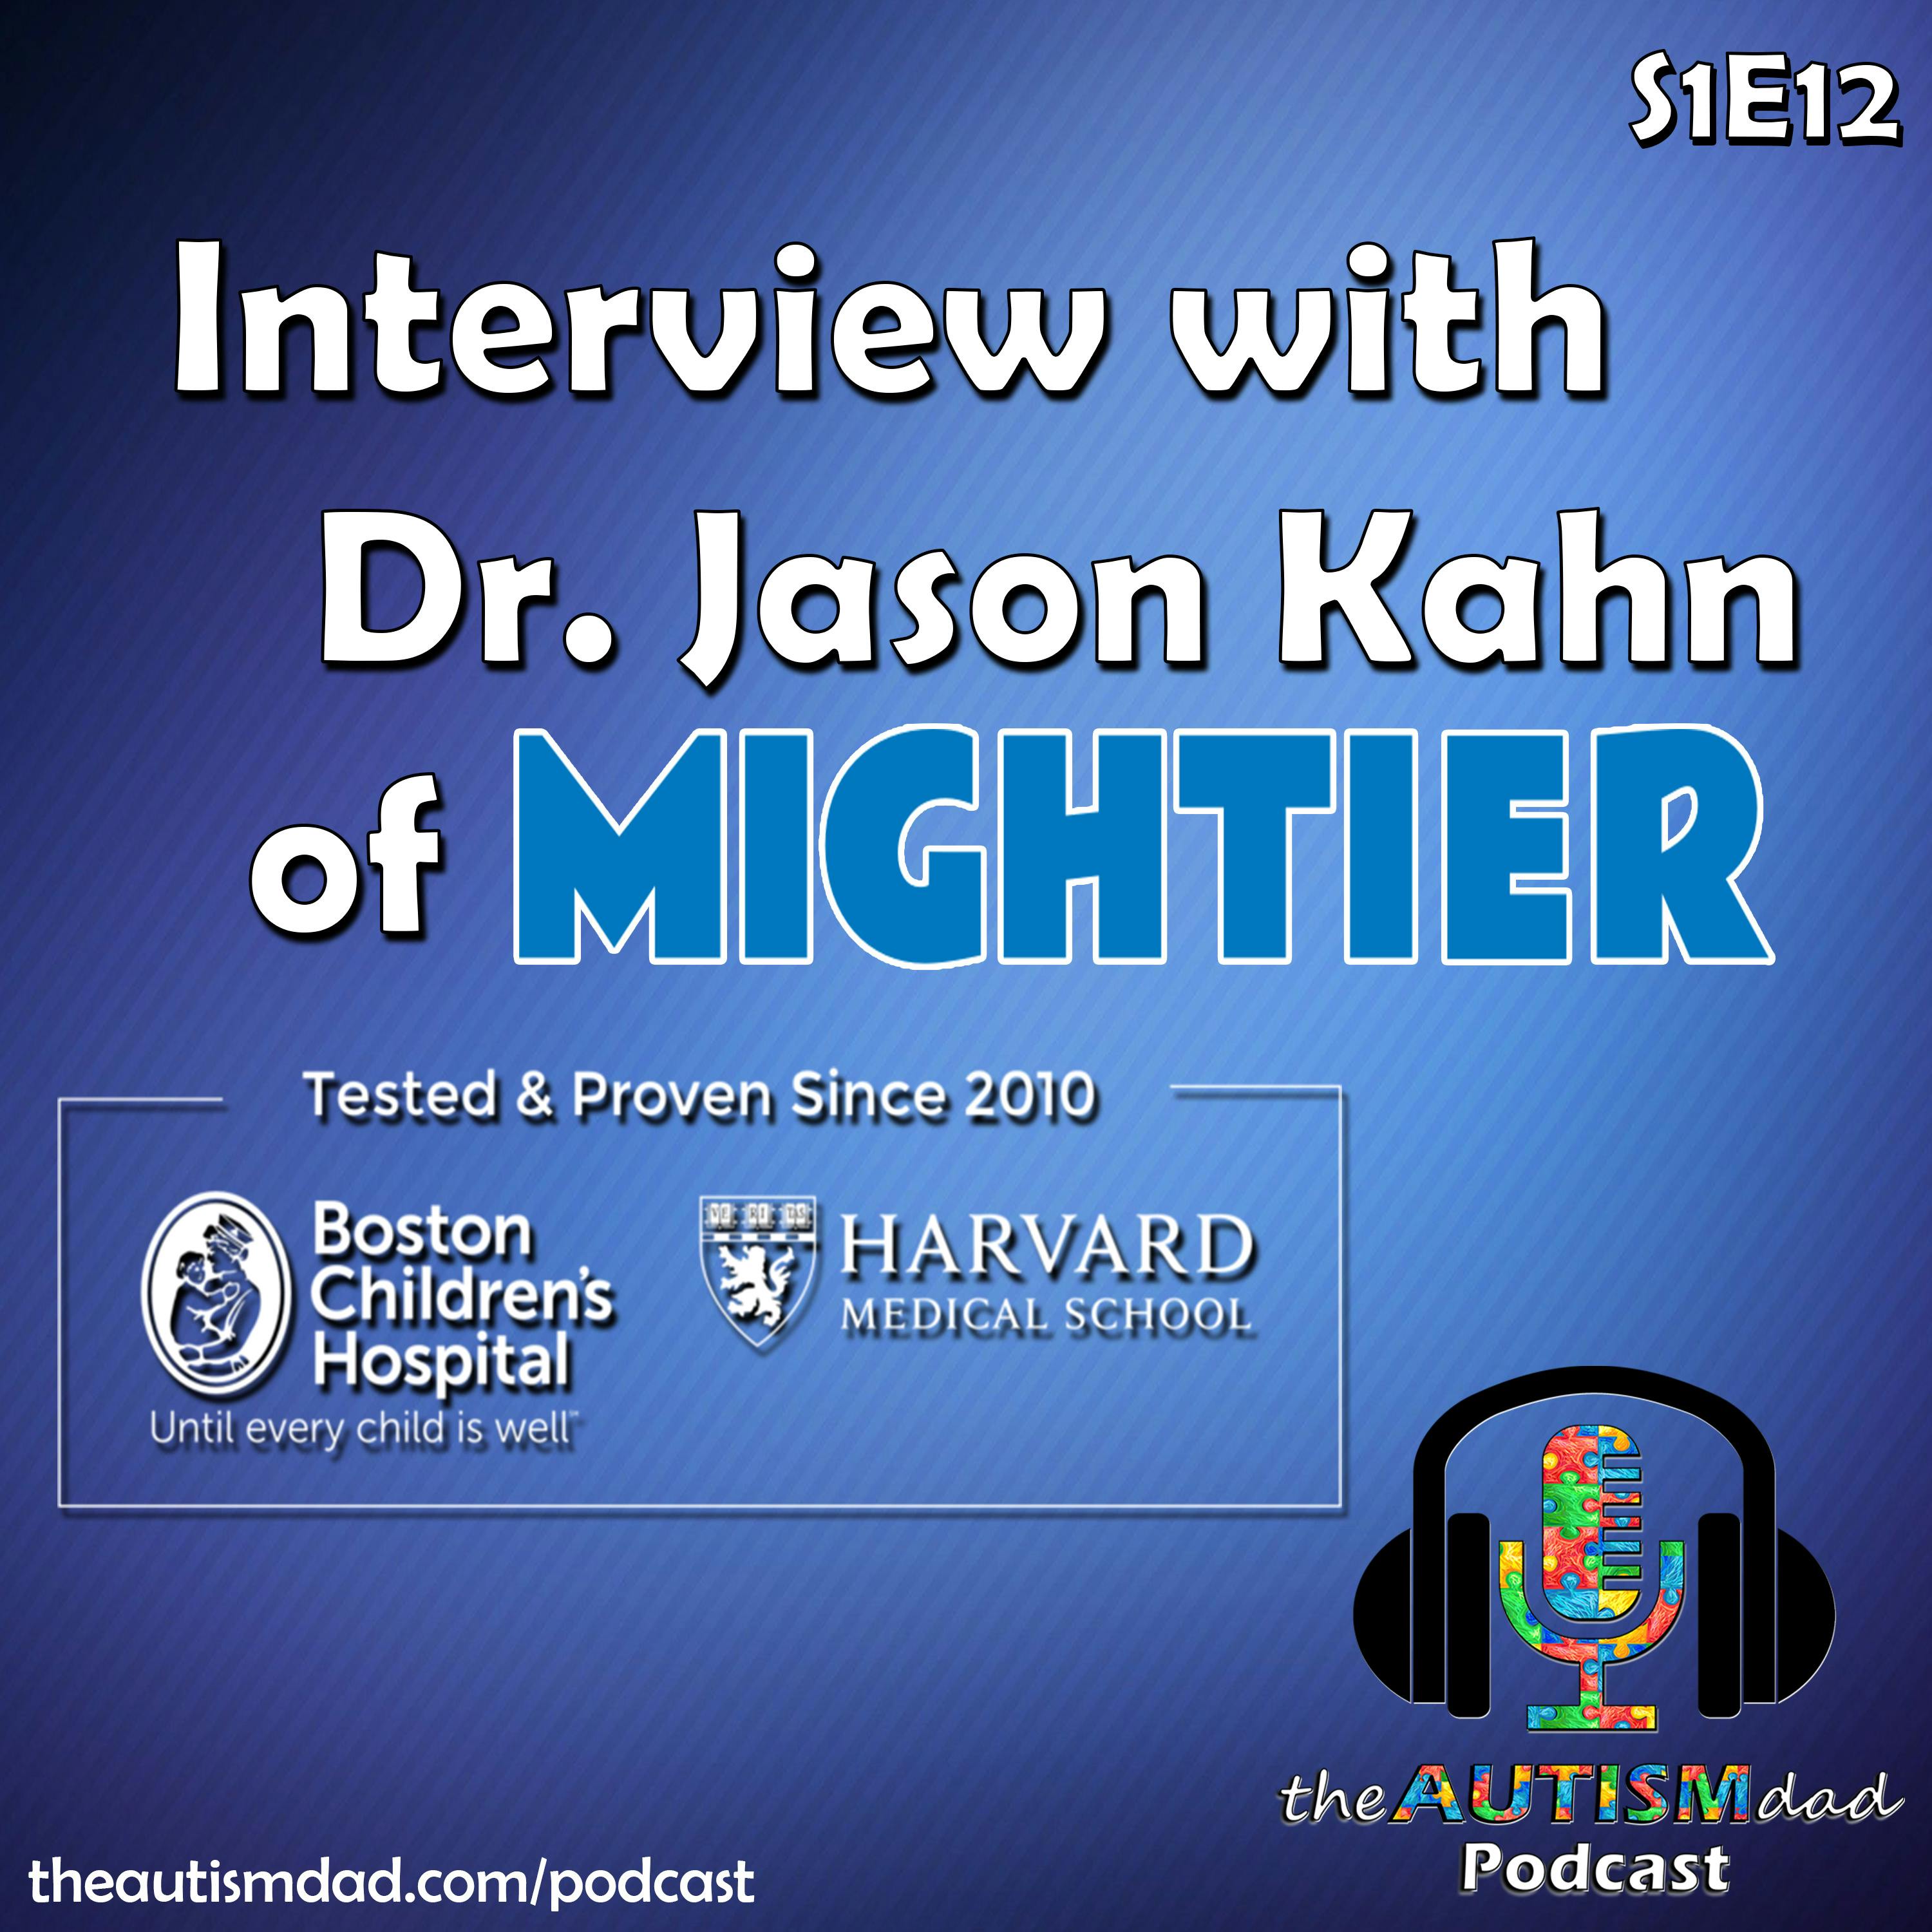 Dr. Jason Kahn on managing meltdowns with Mightier